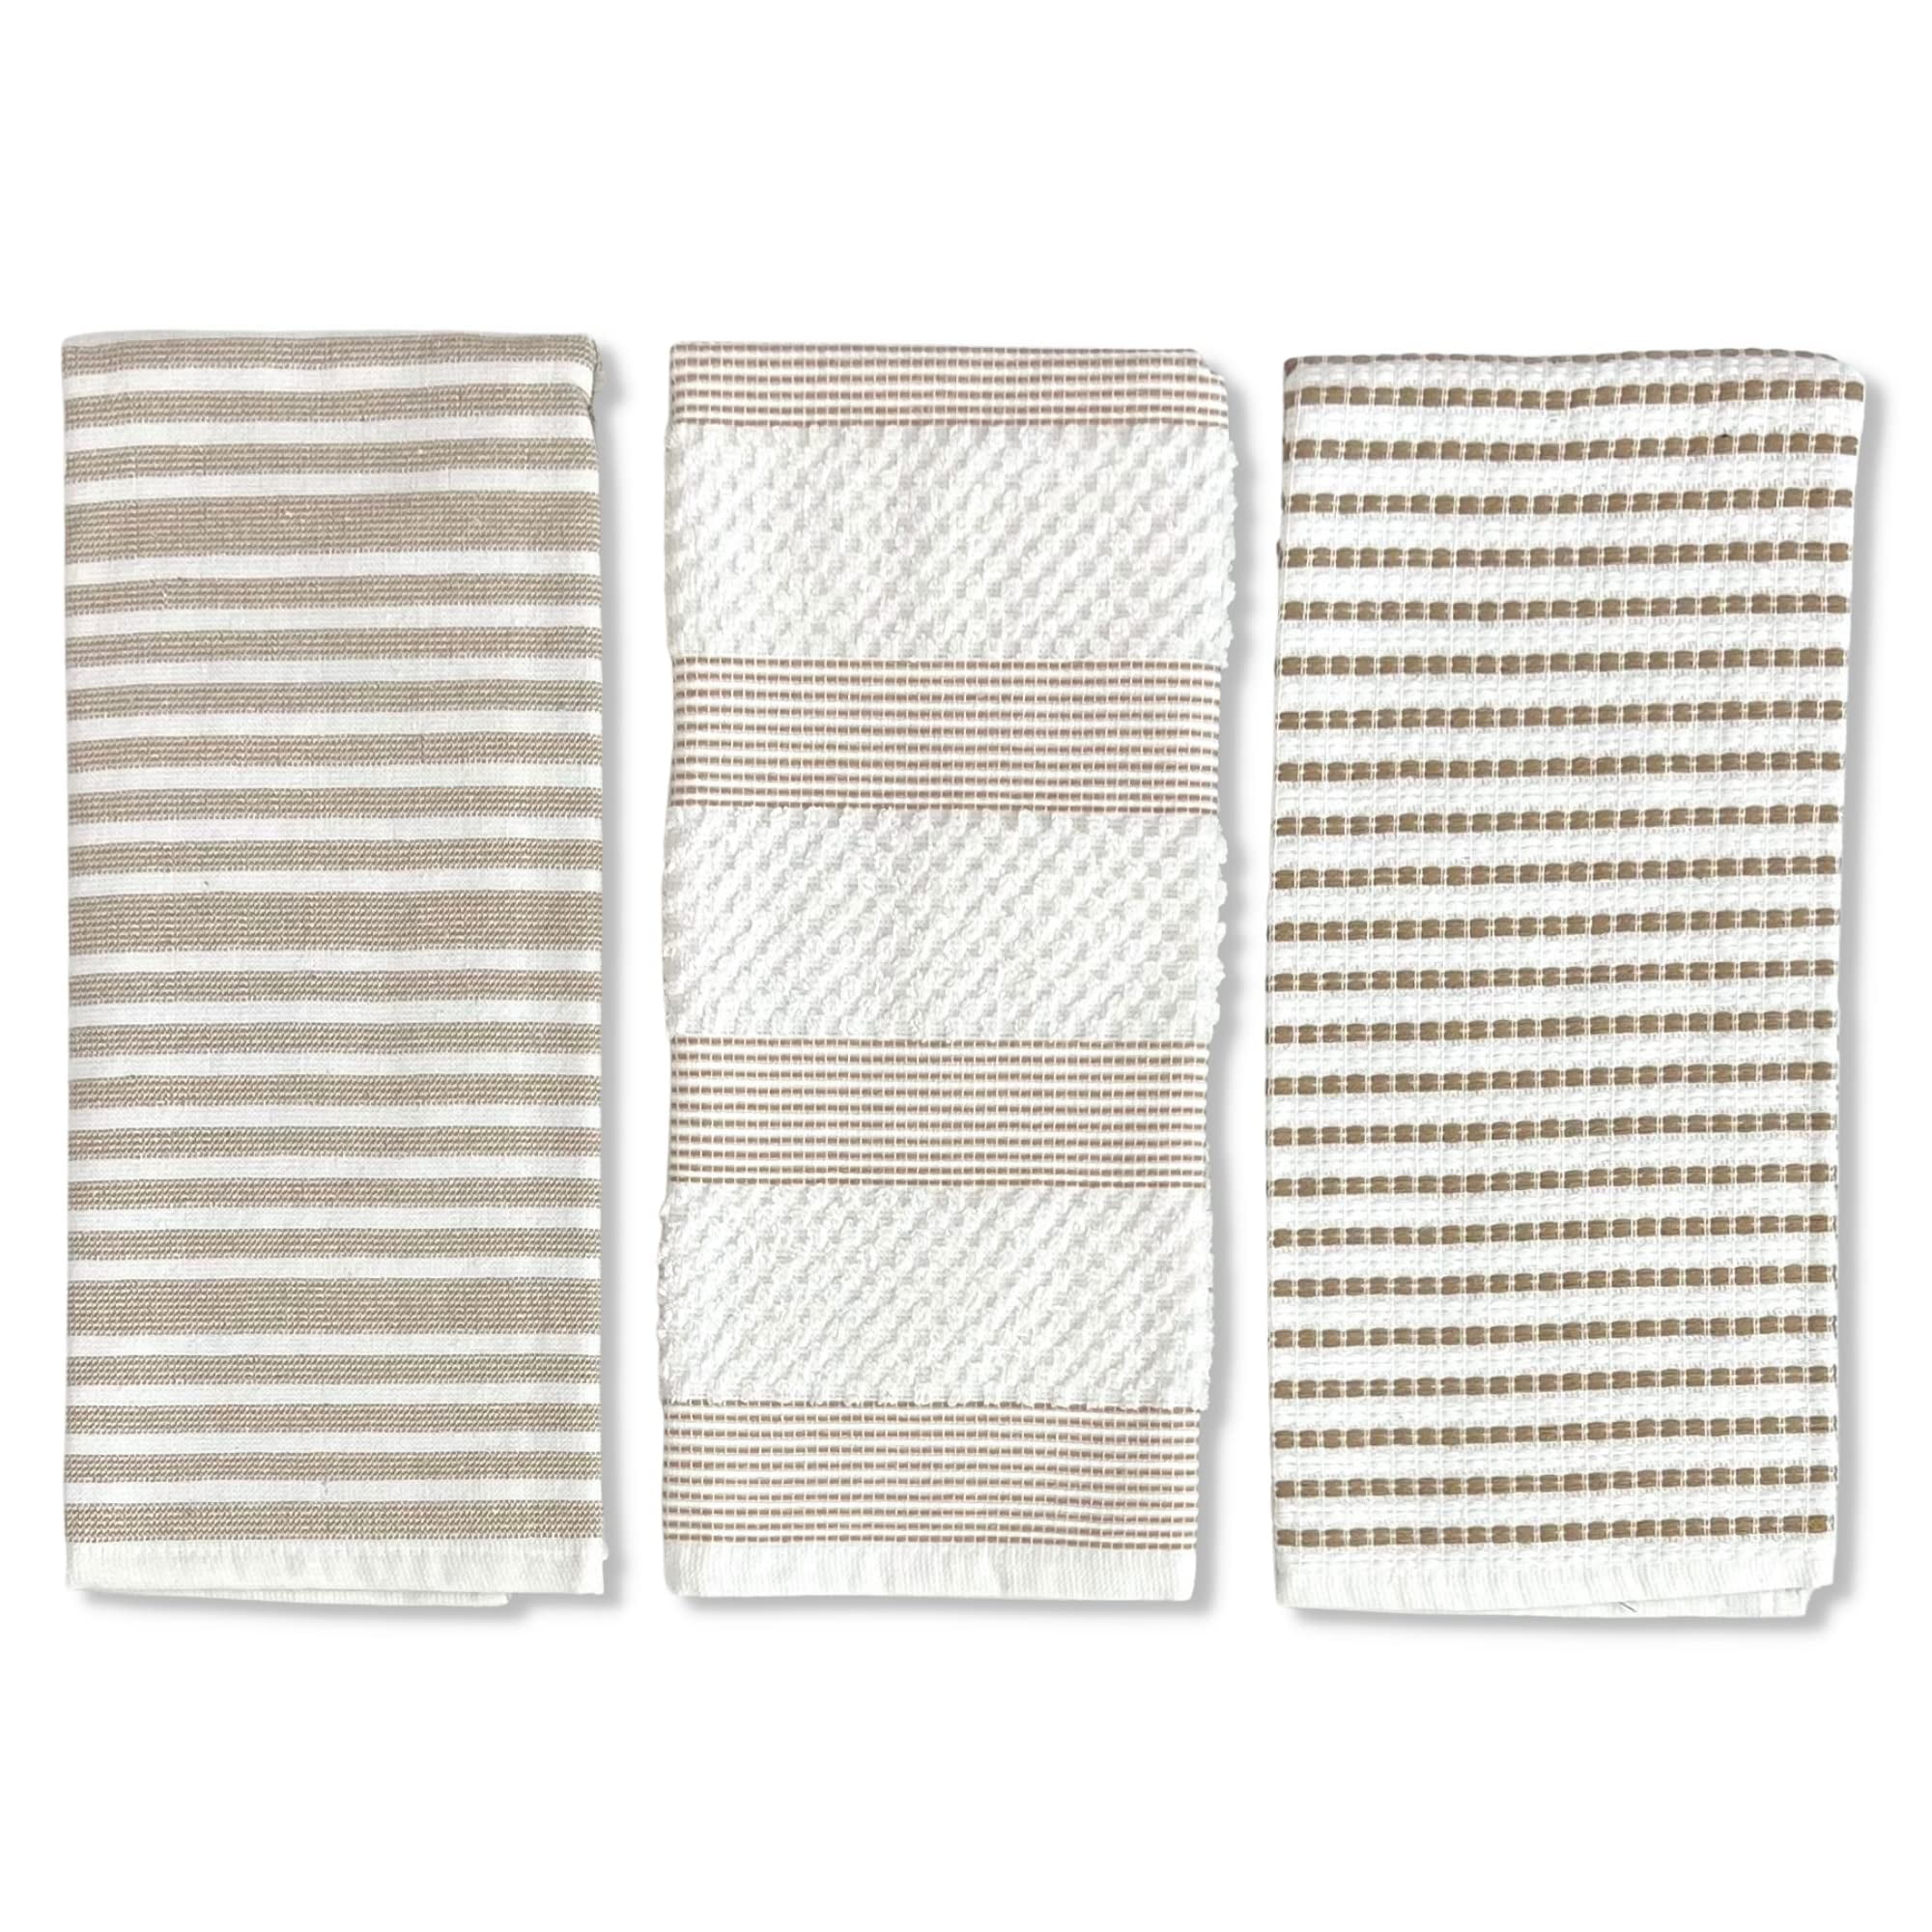 Serafina Home Oversized White Yellow Kitchen Towels: 100% Cotton Soft  Absorbent Assortment Ribbed Terry Loop, Set of 3 Multipurpose for Everyday  Use